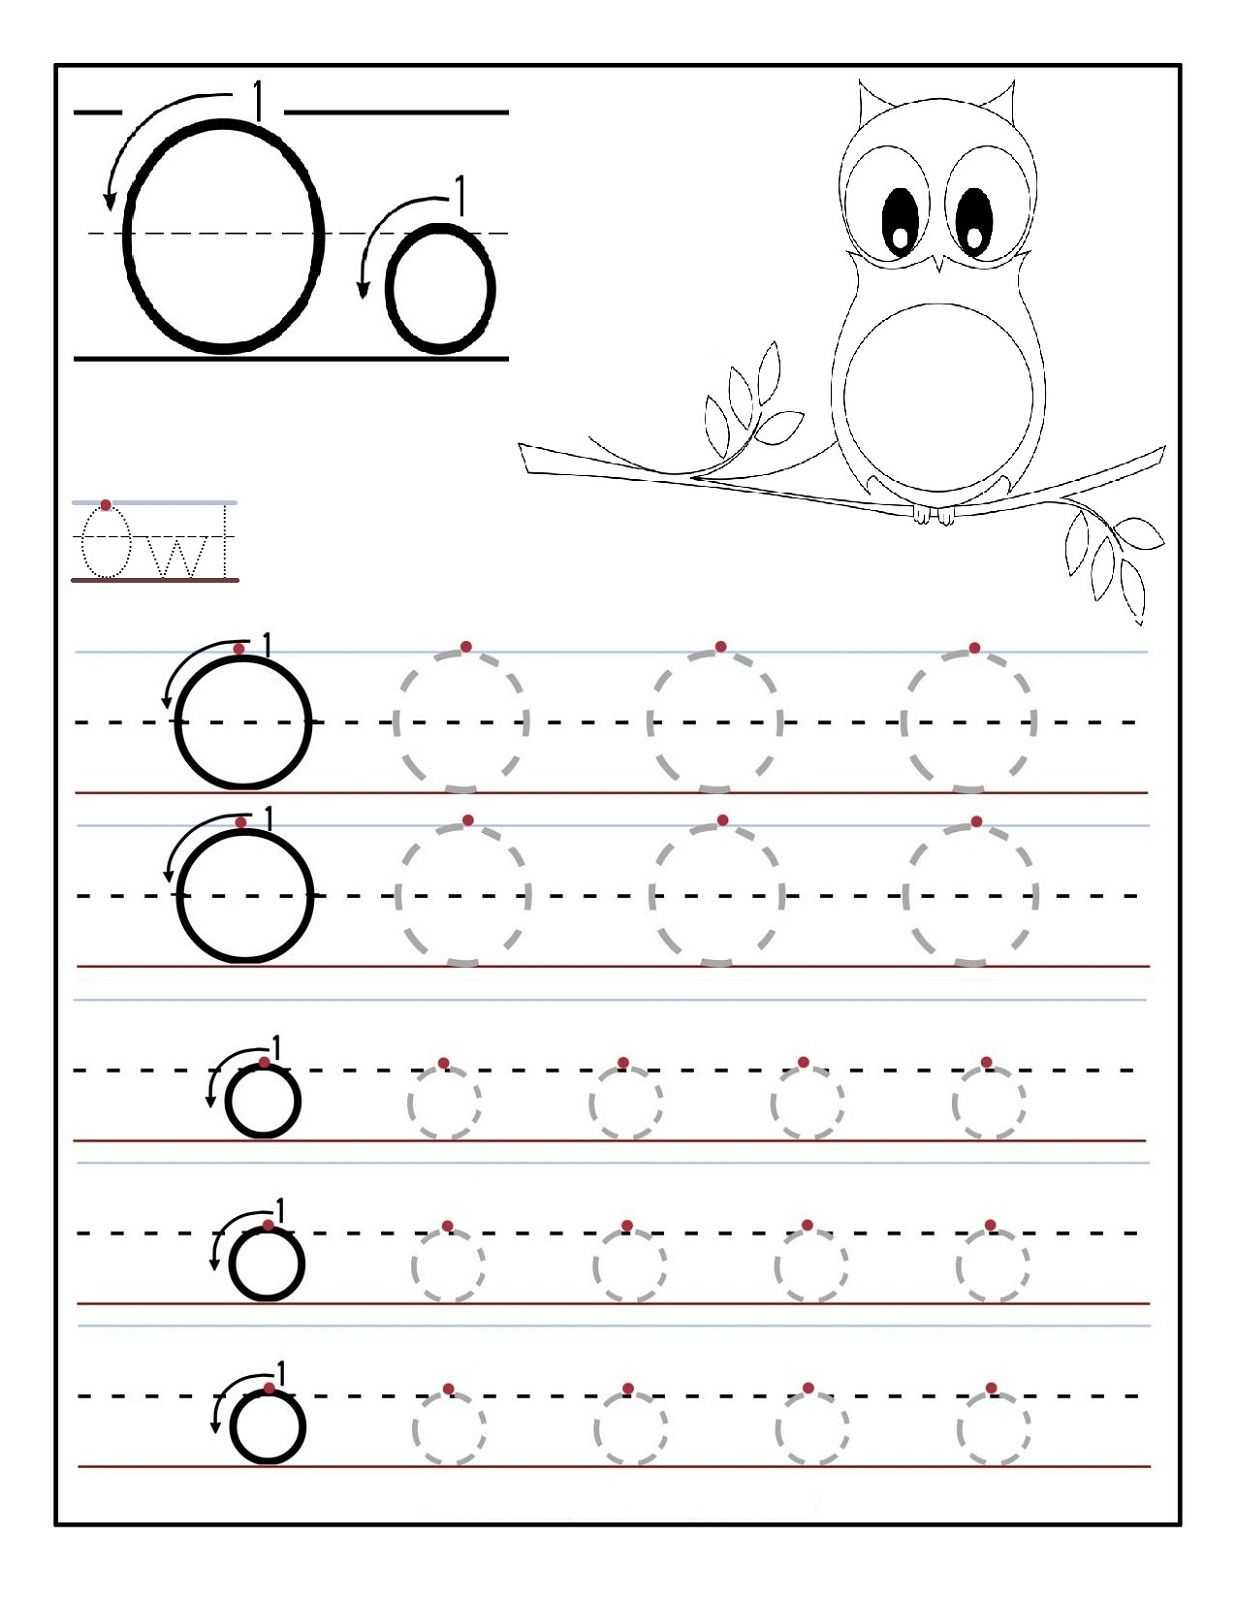 Adverb Practice Worksheets together with Free Printable Worksheets Lovely Math Worksheets for 3rd Grade